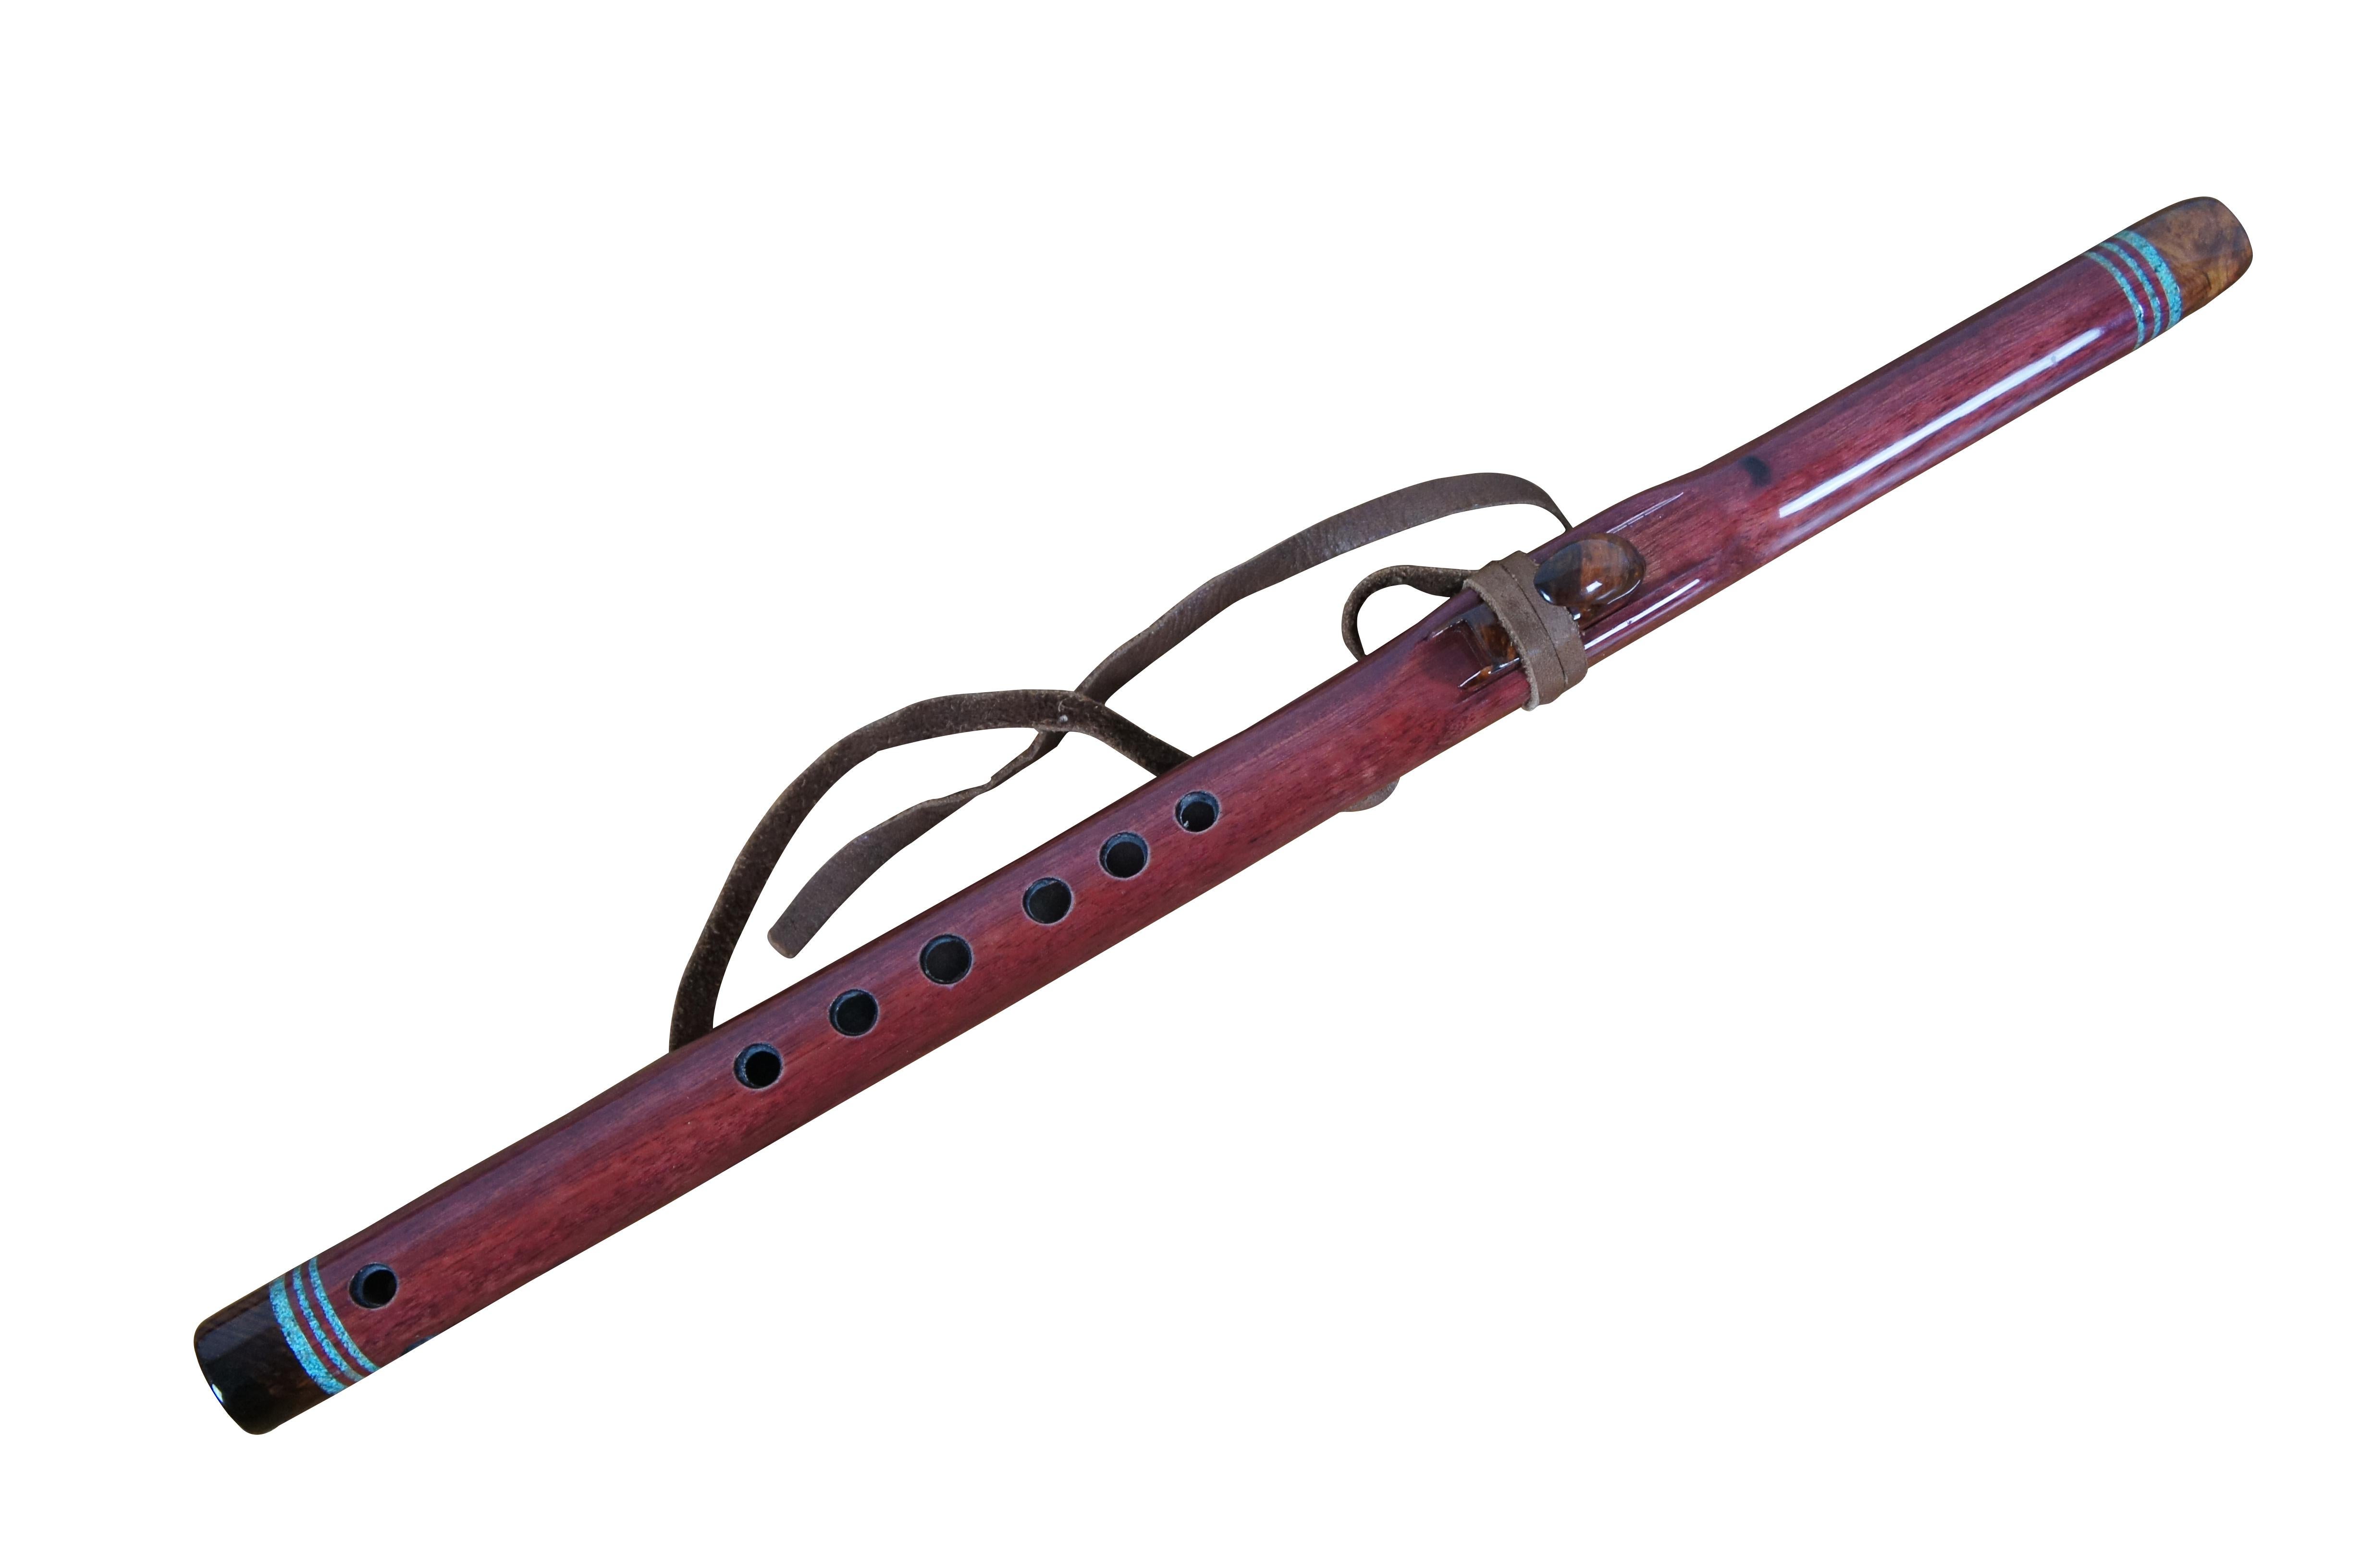 Beautifully crafted Woodsounds Native American flute, custom made by Brent Haines from Purple Heart with Honduran Rosewood Burl and inlaid turquoise chip rings. Key: High C. Includes handmade fleece carrying case.

Dimensions:
2.25